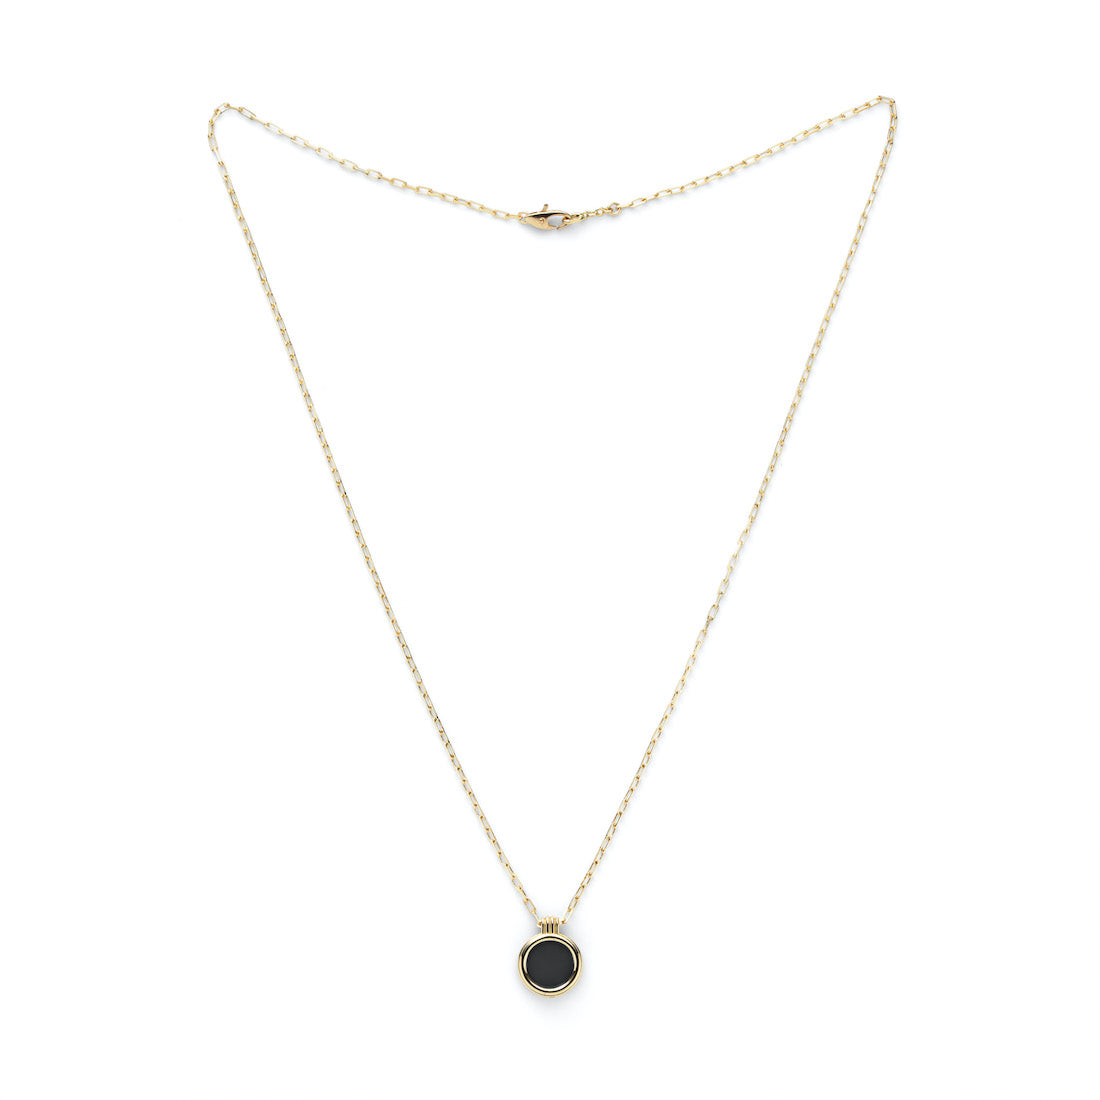 K18　ネックレス　Necklace　ペンダントネックレス　Pendant Necklace　オニキス　Onyx